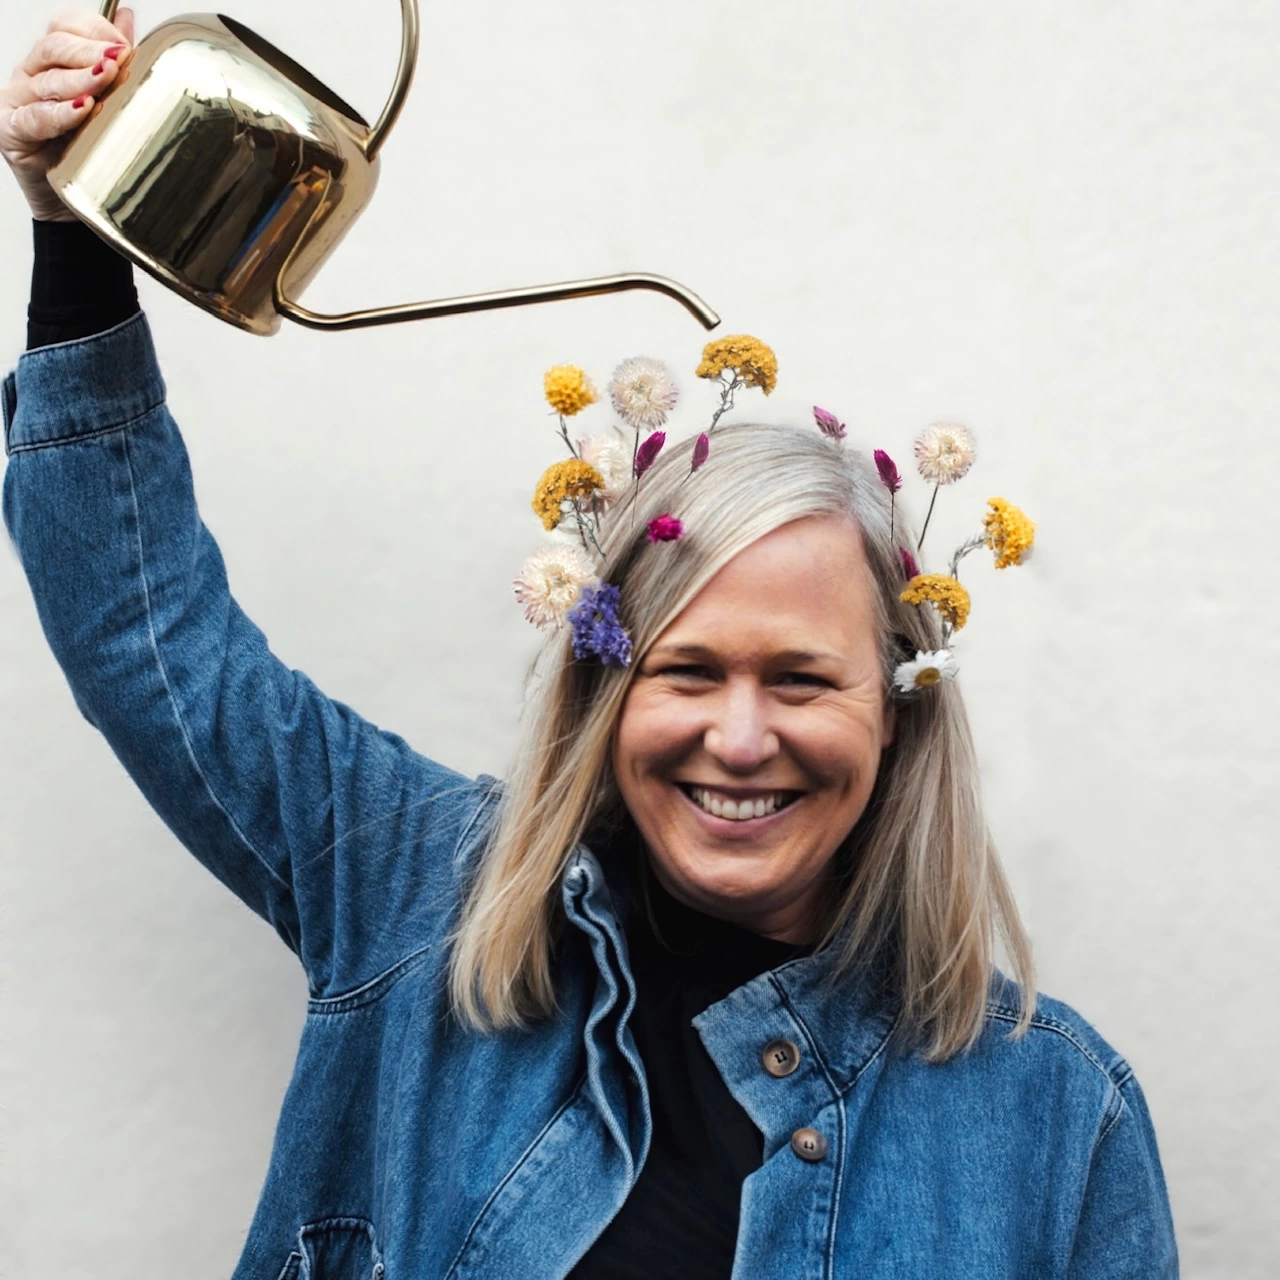 Kate Peers with flowers in her hair holding a metal watering can over her head 